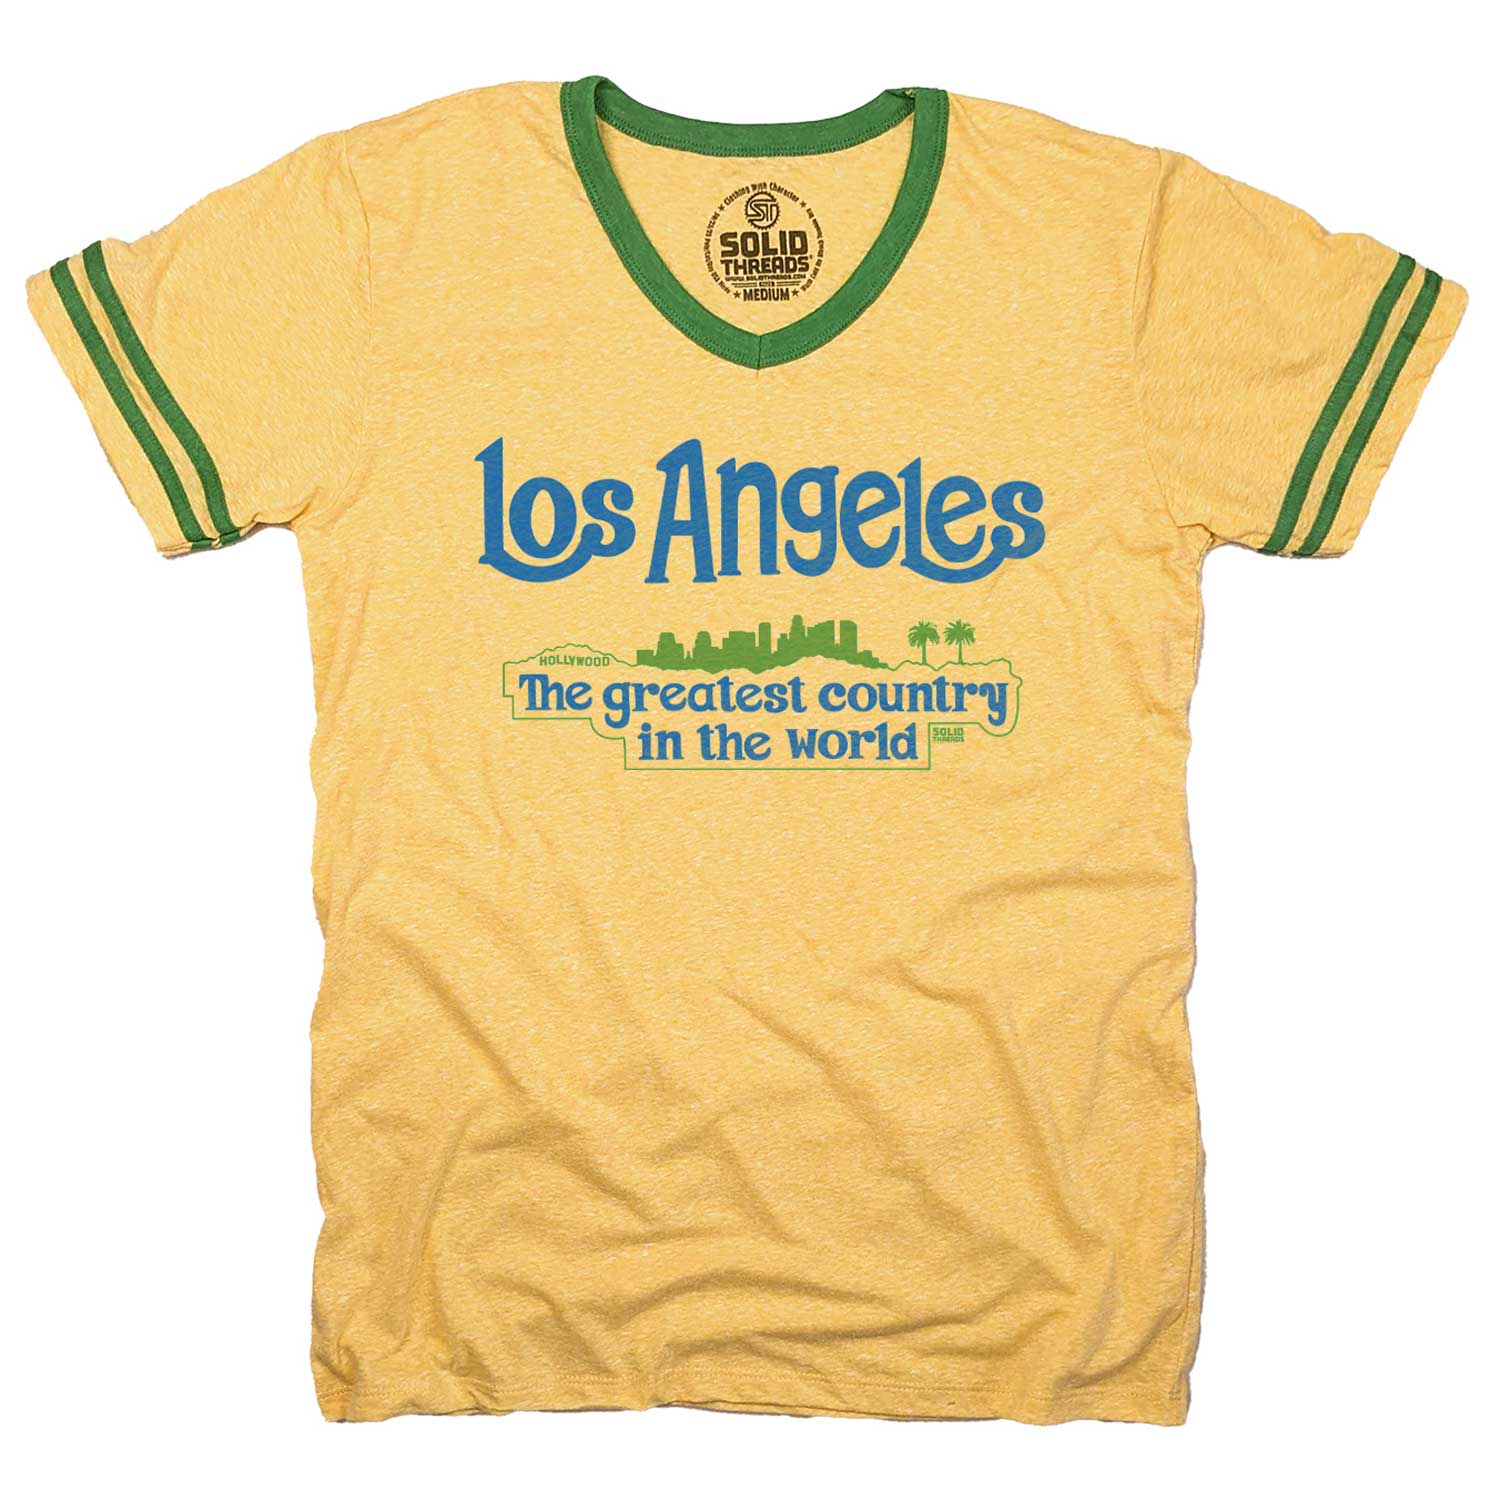 Men's Los Angeles Greatest Country In the World Vintage Graphic V-Neck Tee | Solid Threads